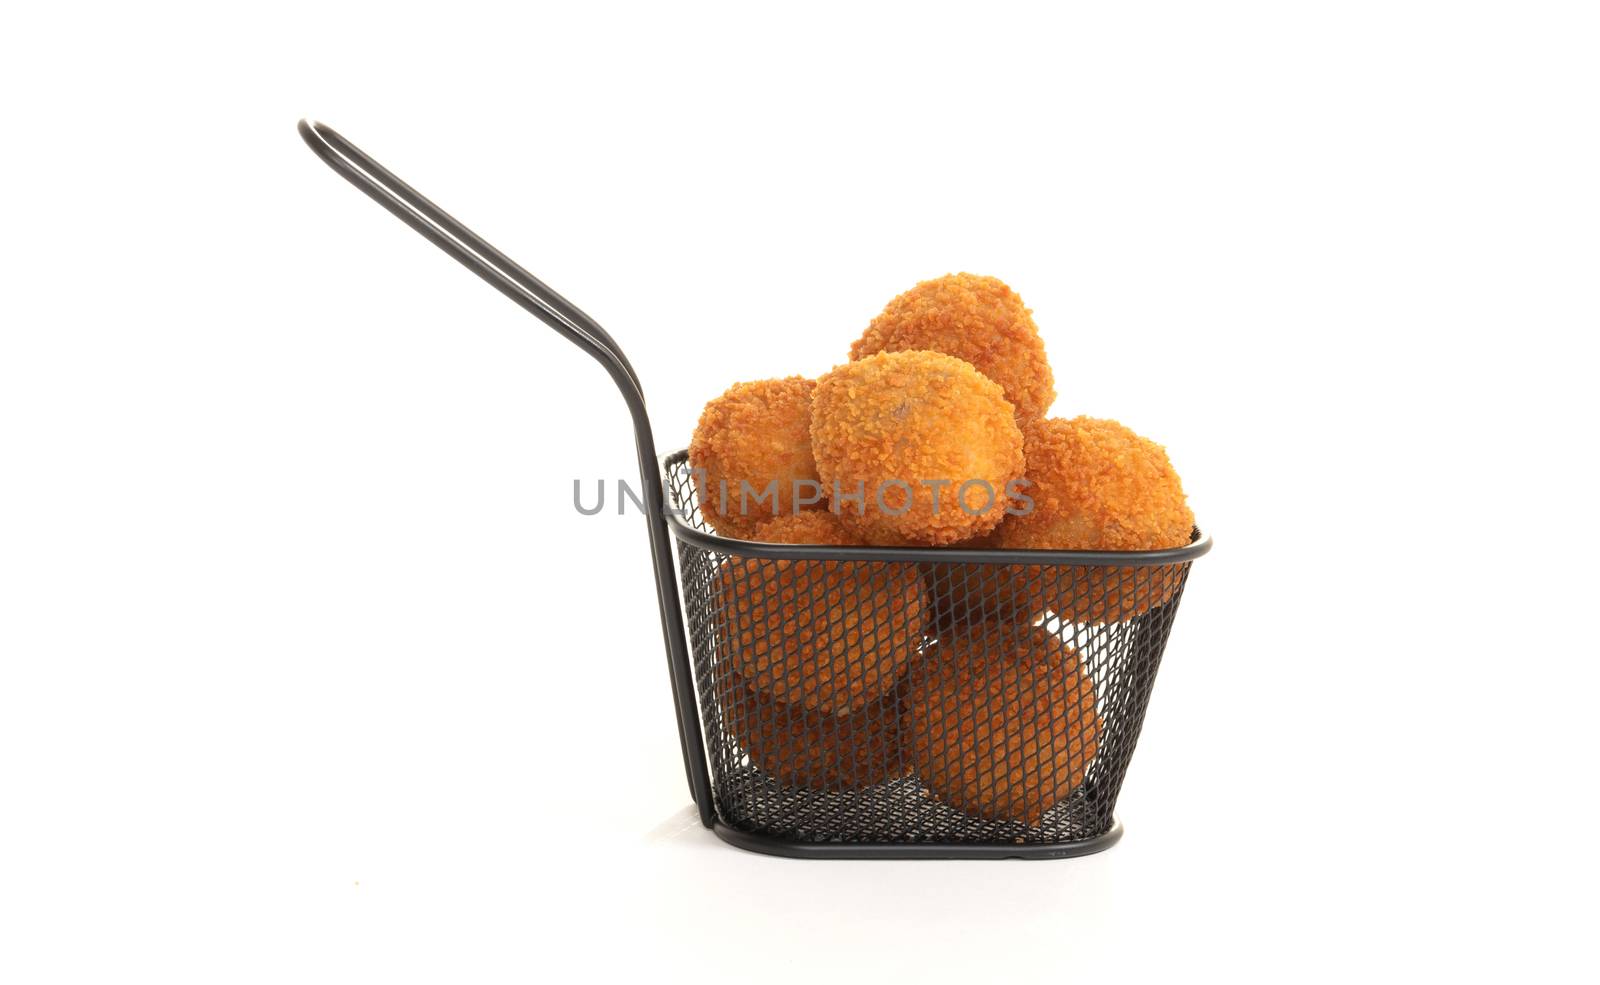 Dutch traditional snack bitterbal in a small basket, isolated